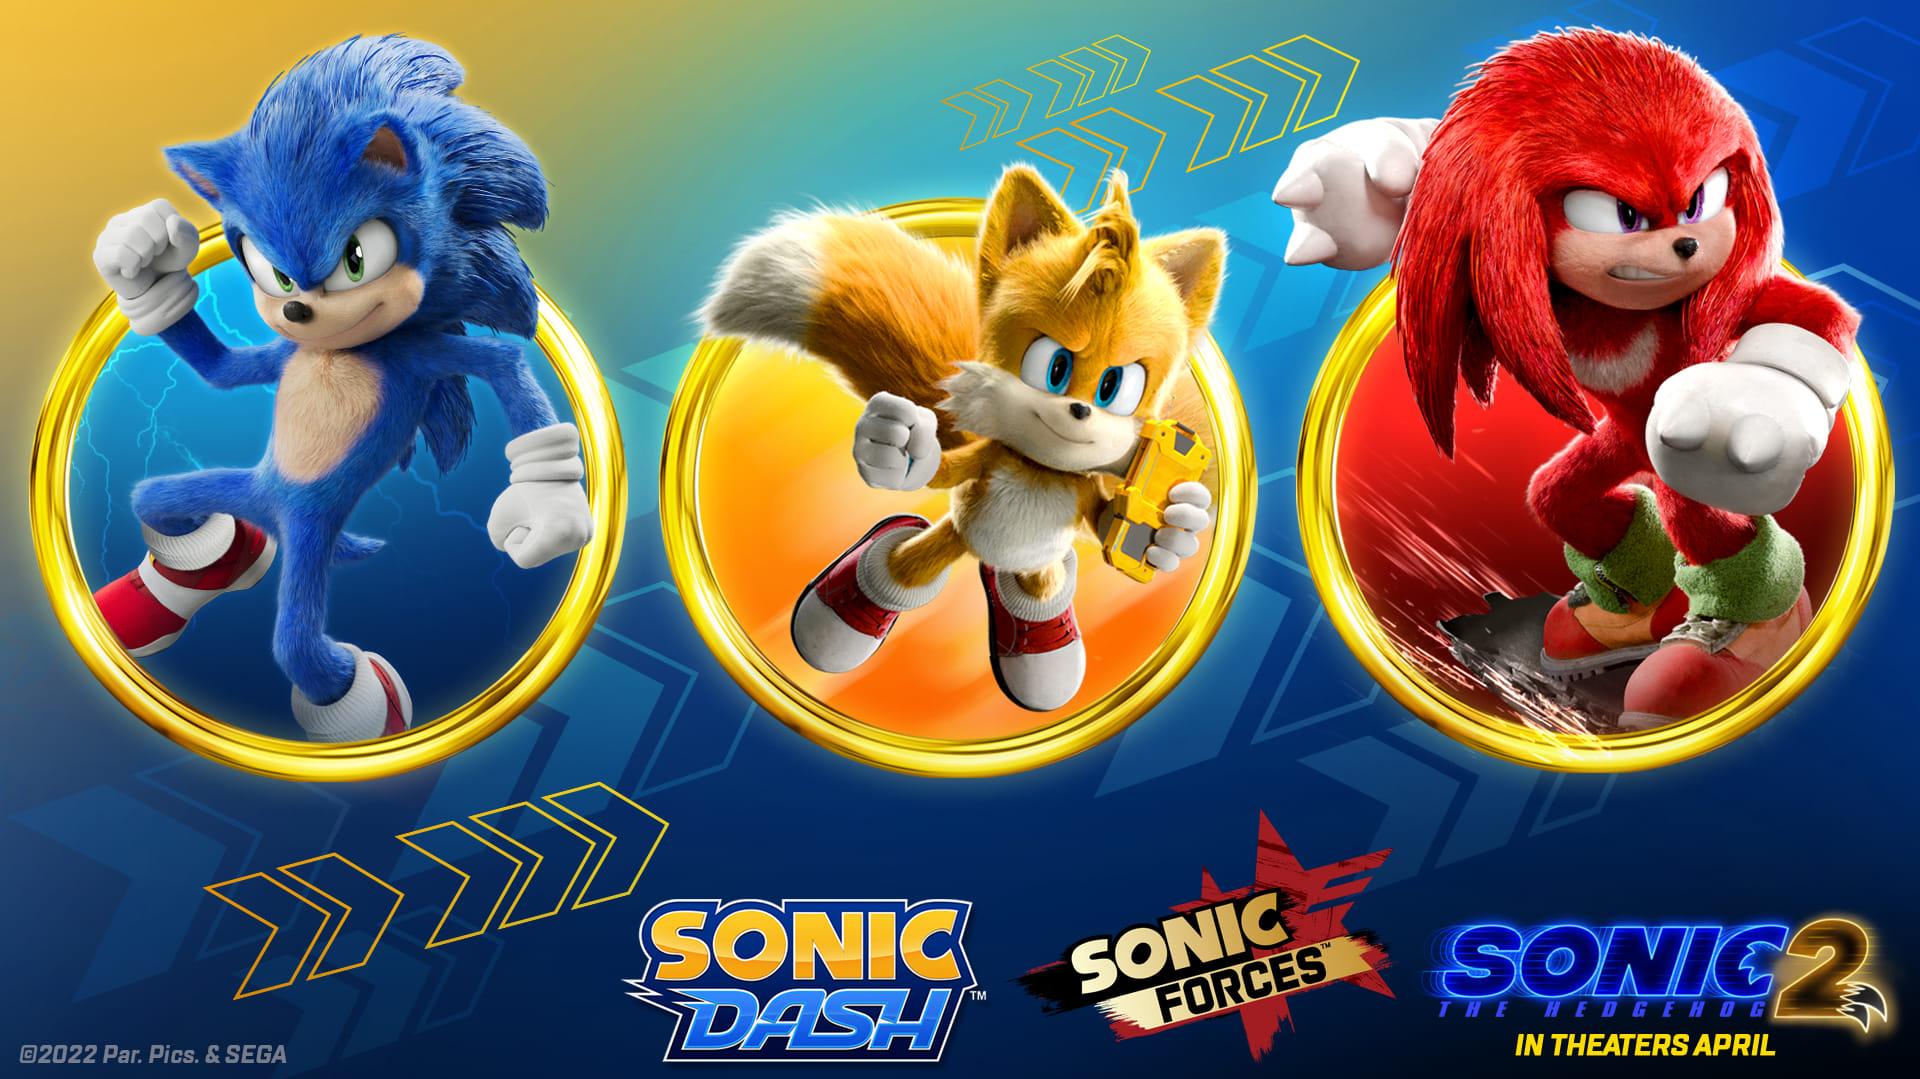 Take The Big Screen Action Home With Sonic Hedgehog